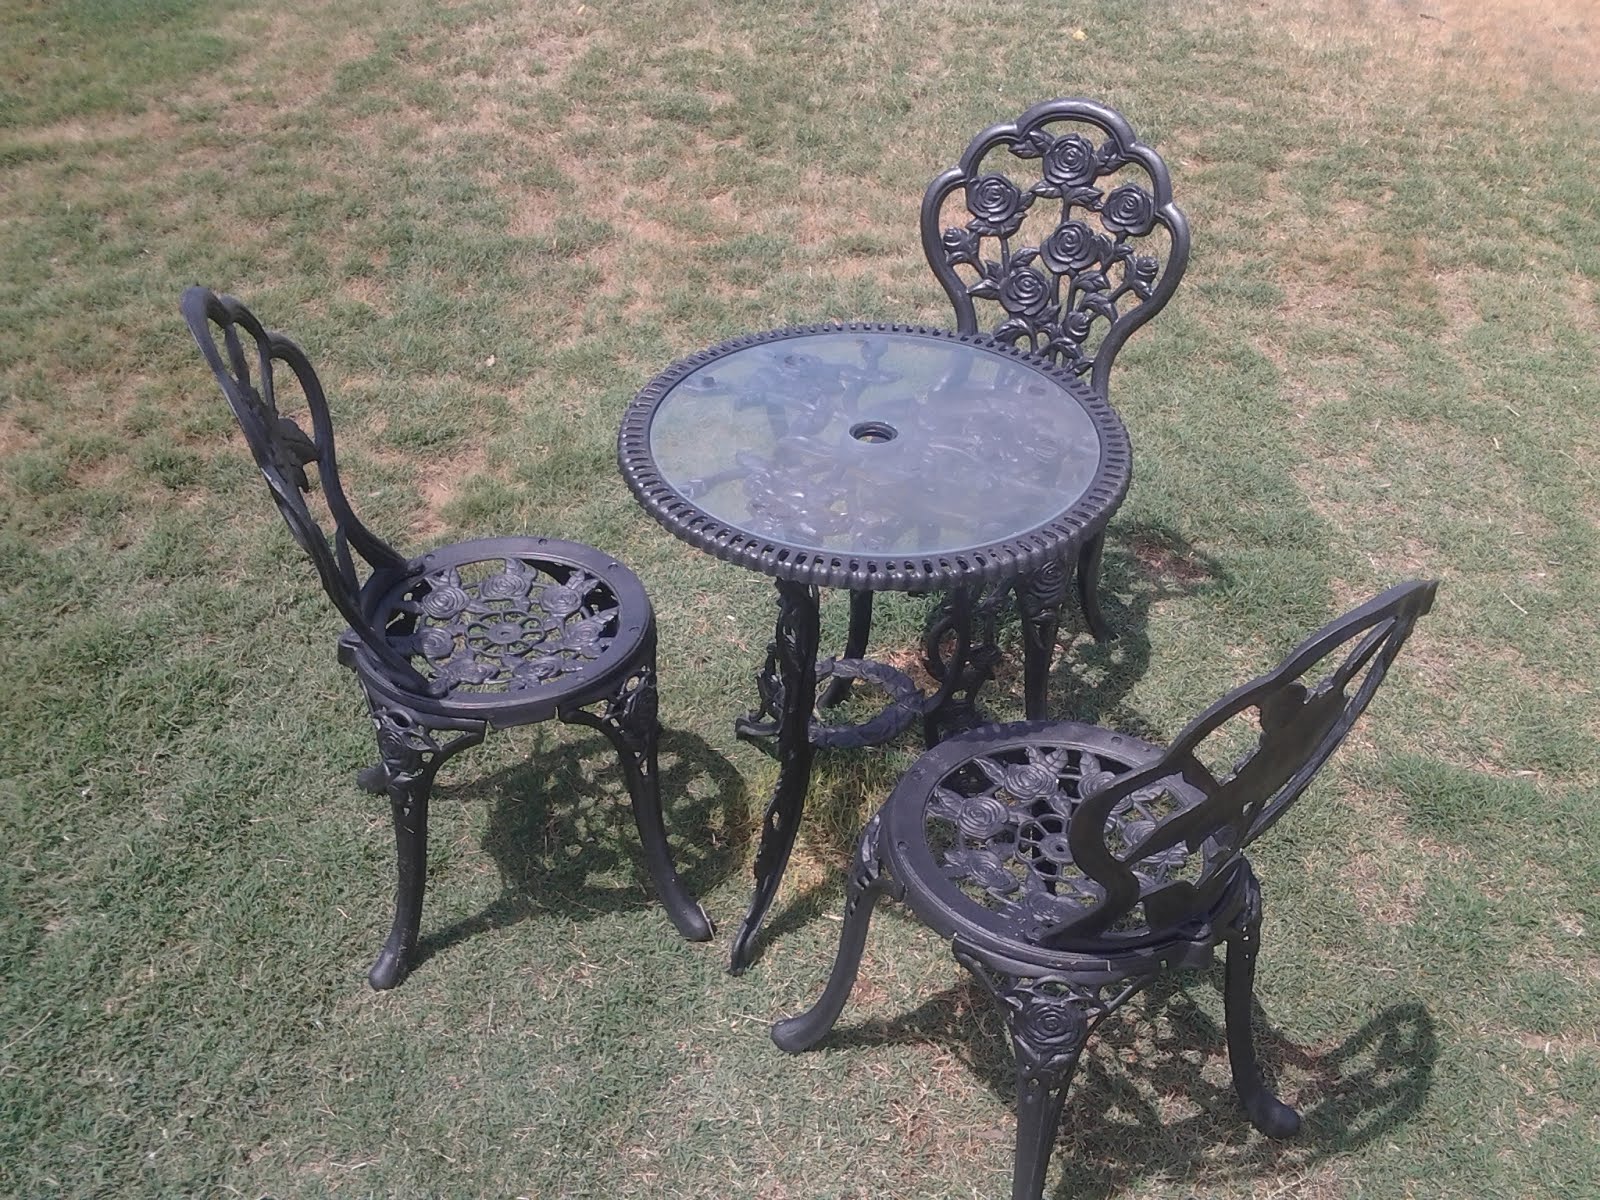 Real cast iron antique table and 3 chairs $sold